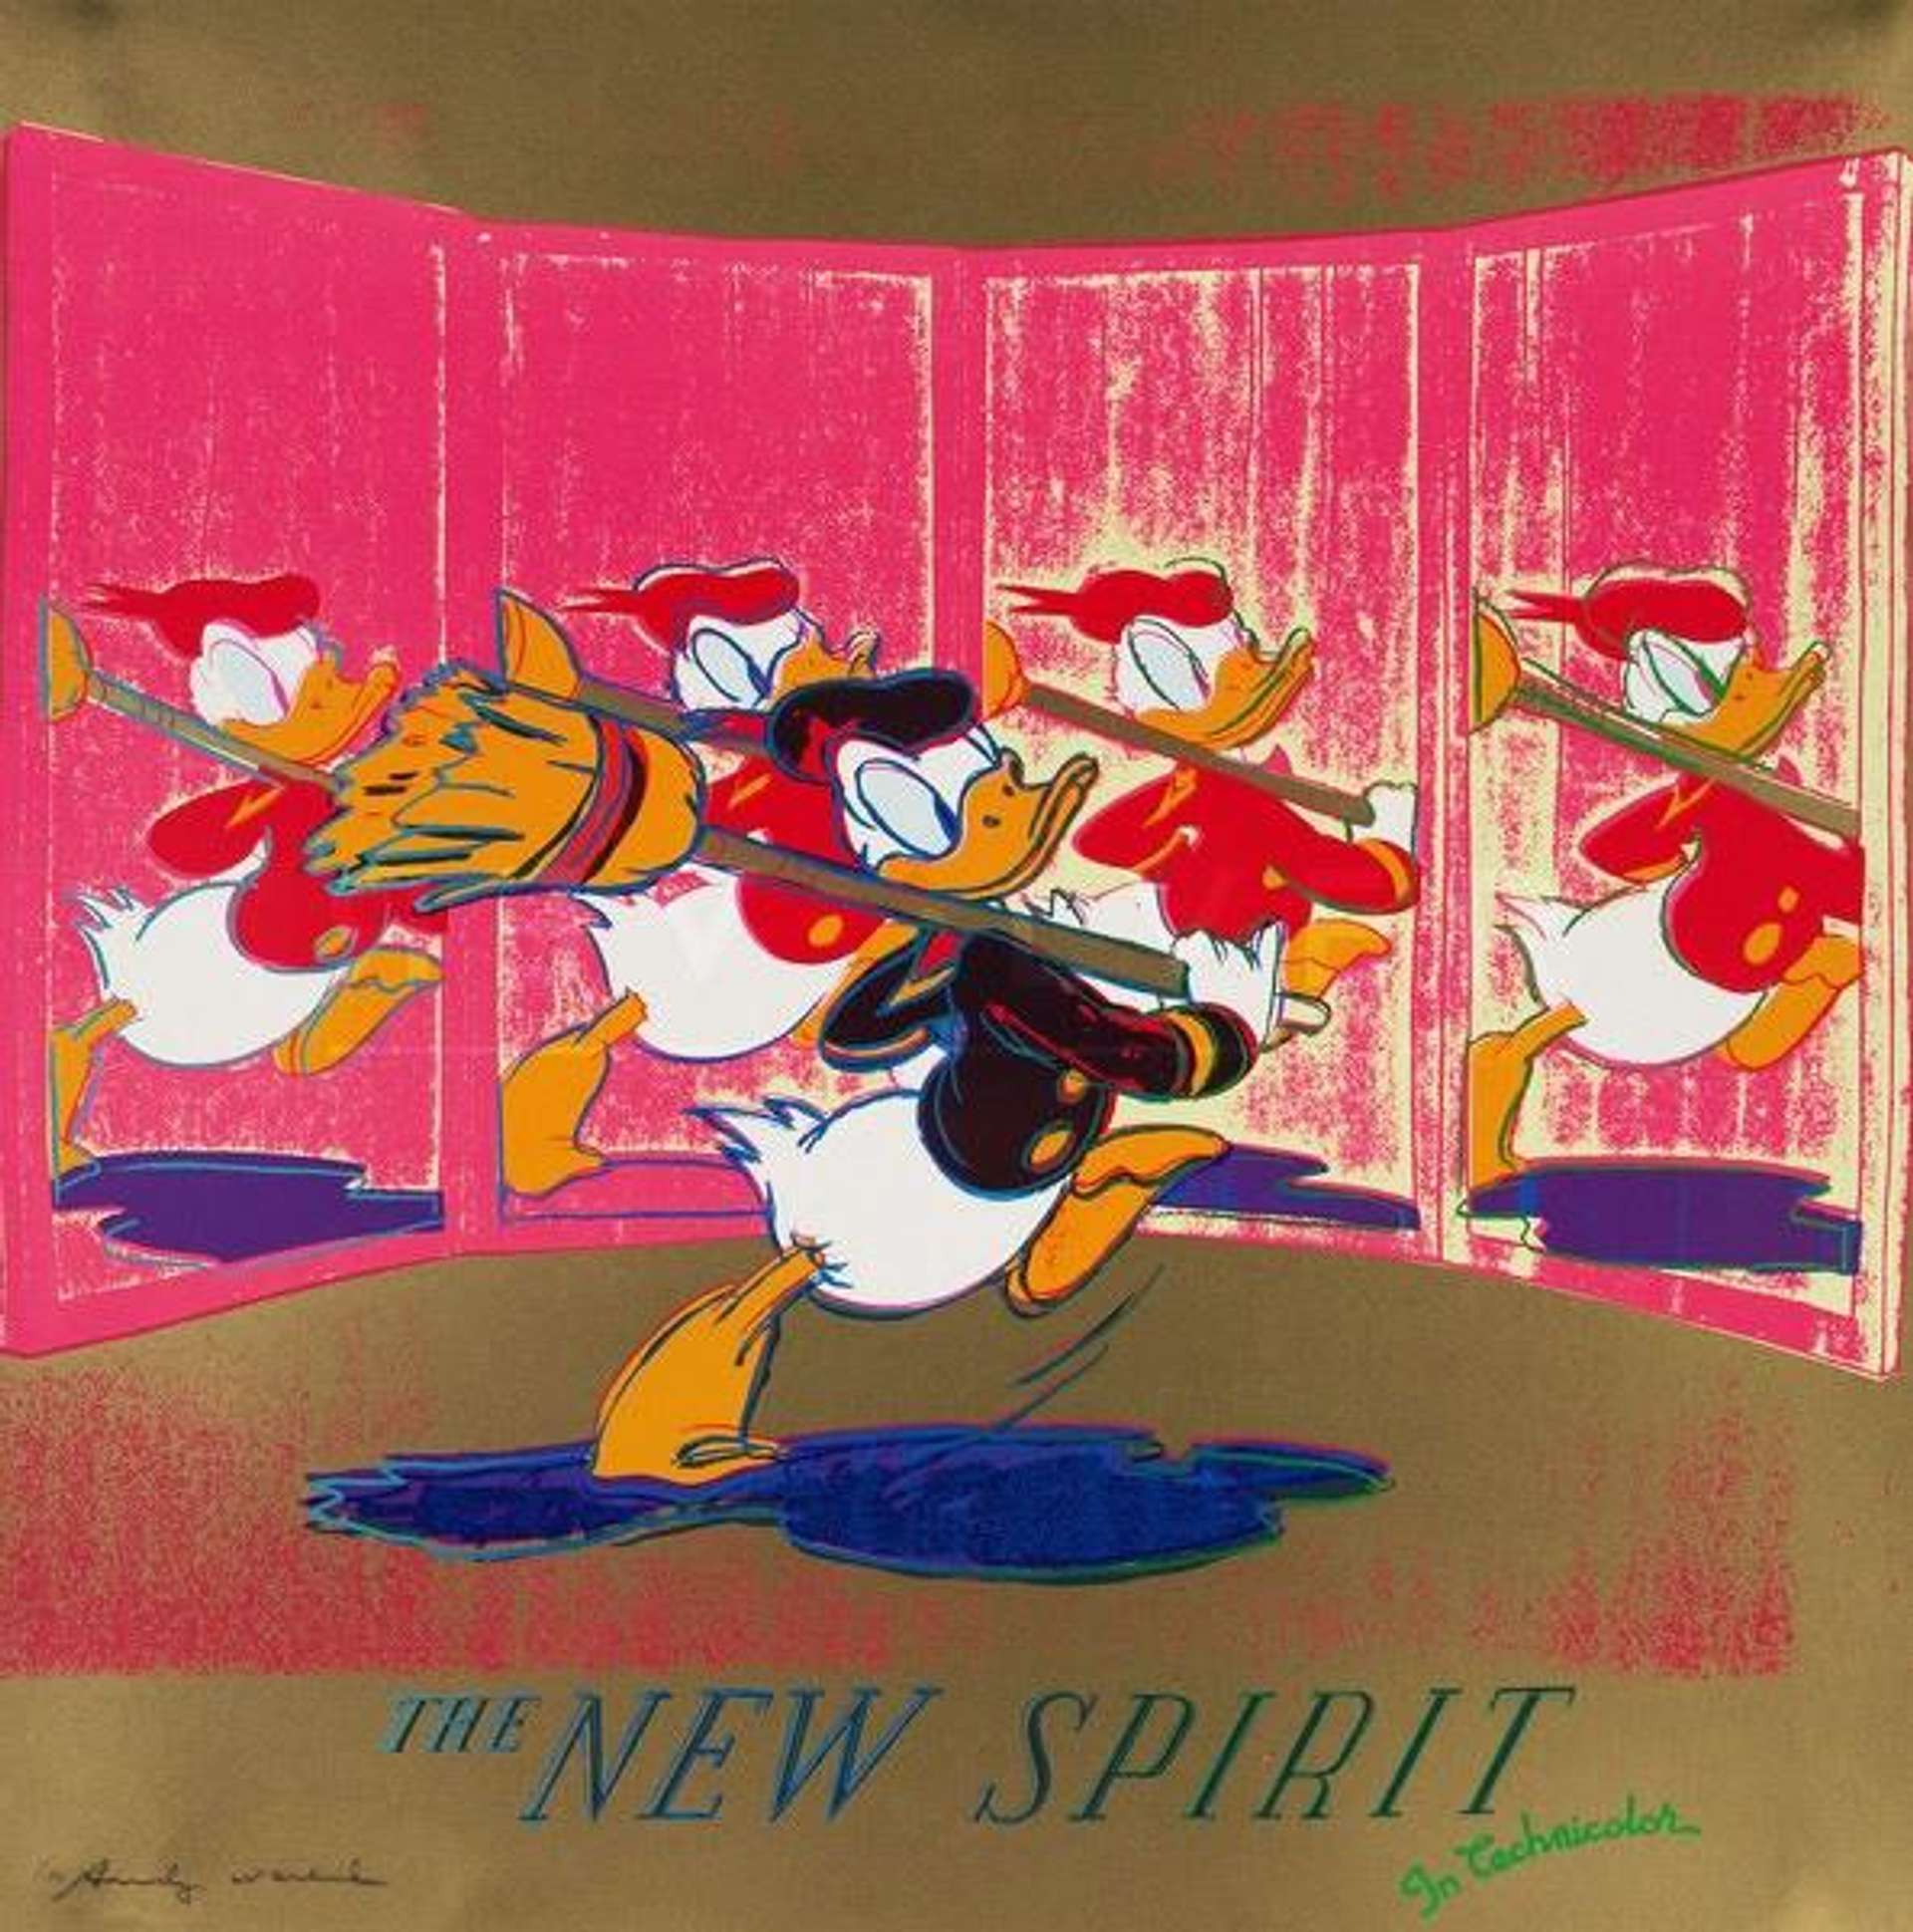 The New Spirit (Donald Duck) (F. & S. II.357) - Signed Print by Andy Warhol 1985 - MyArtBroker